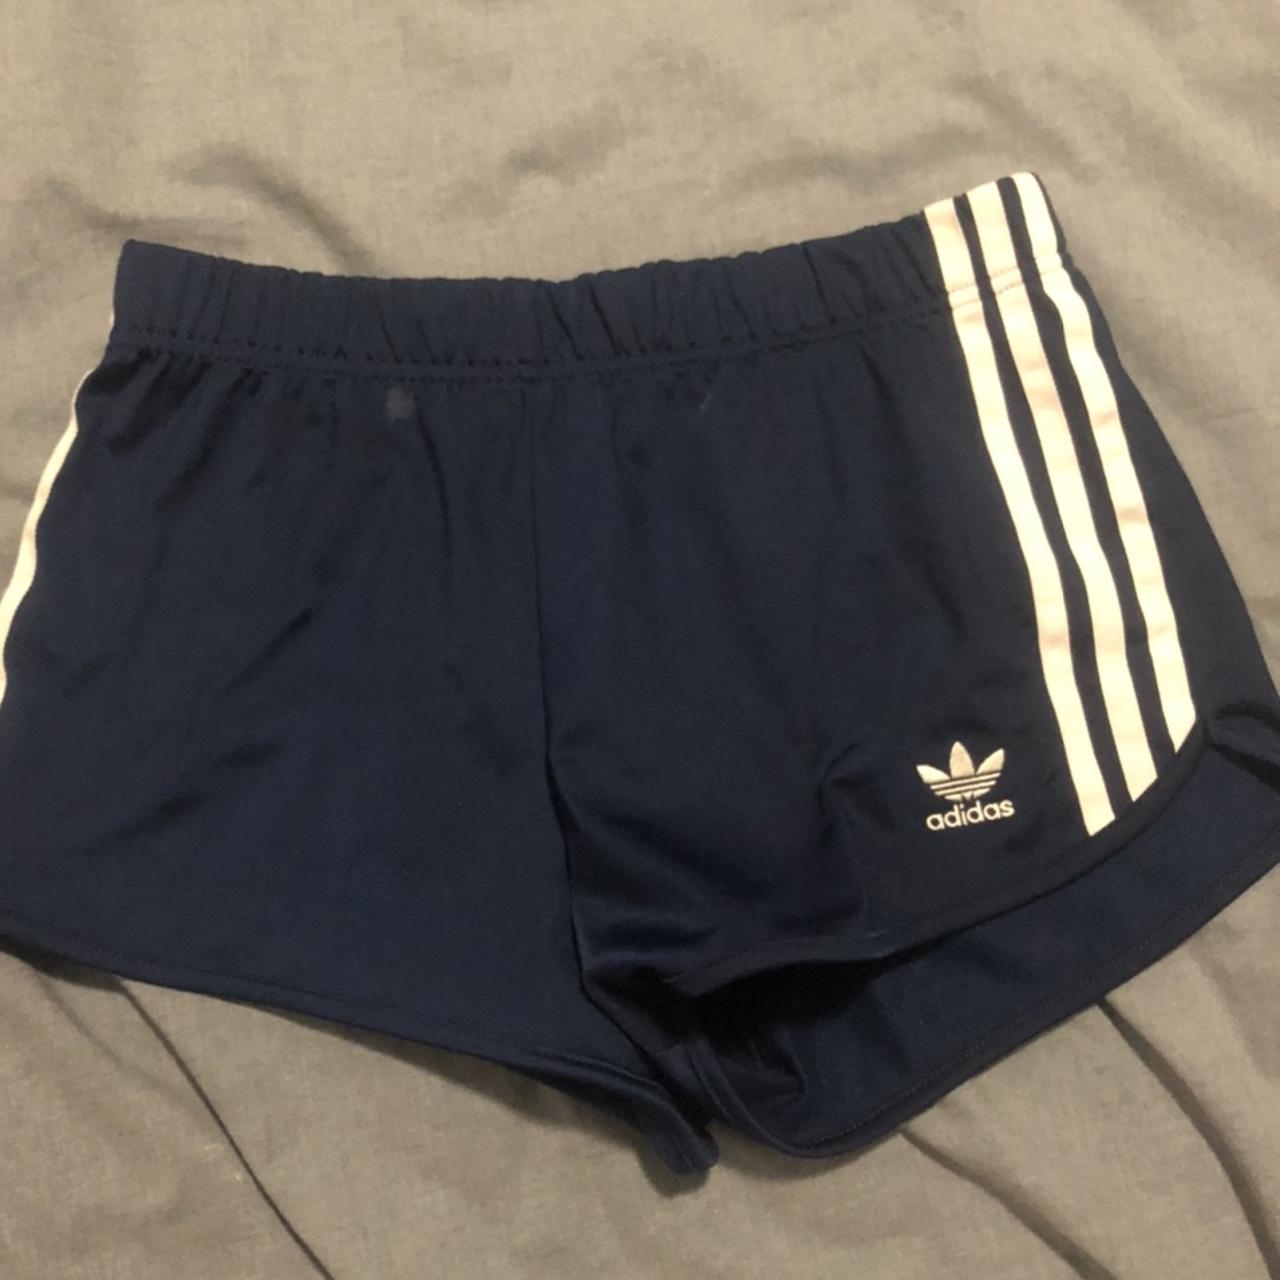 Authentic vintage Adidas velvet lined shorts 🤩 Small... - Depop